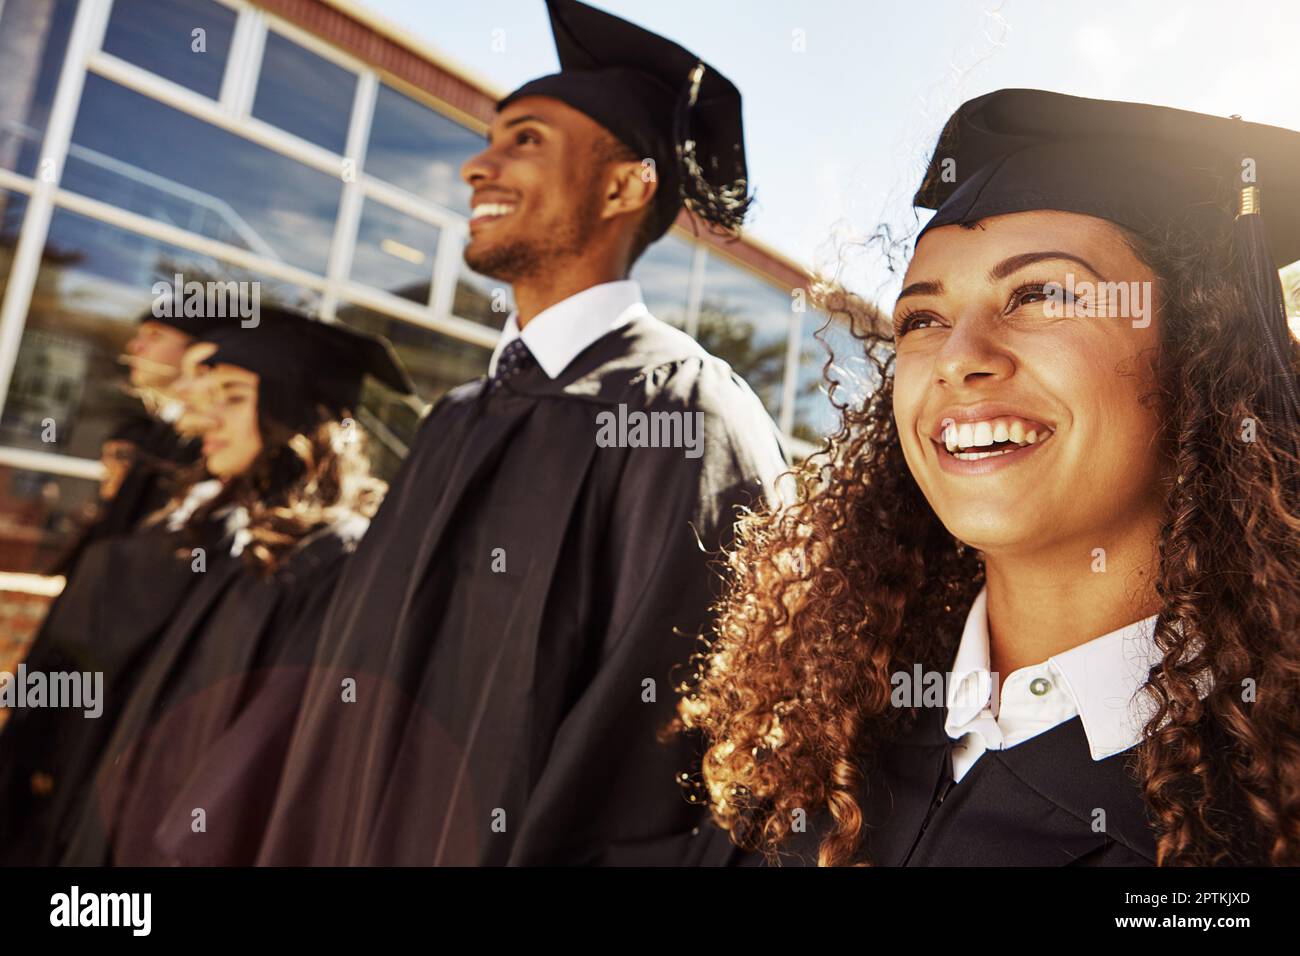 Theyve worked hard to get here today. a group of smiling university students outside on graduation day. Stock Photo